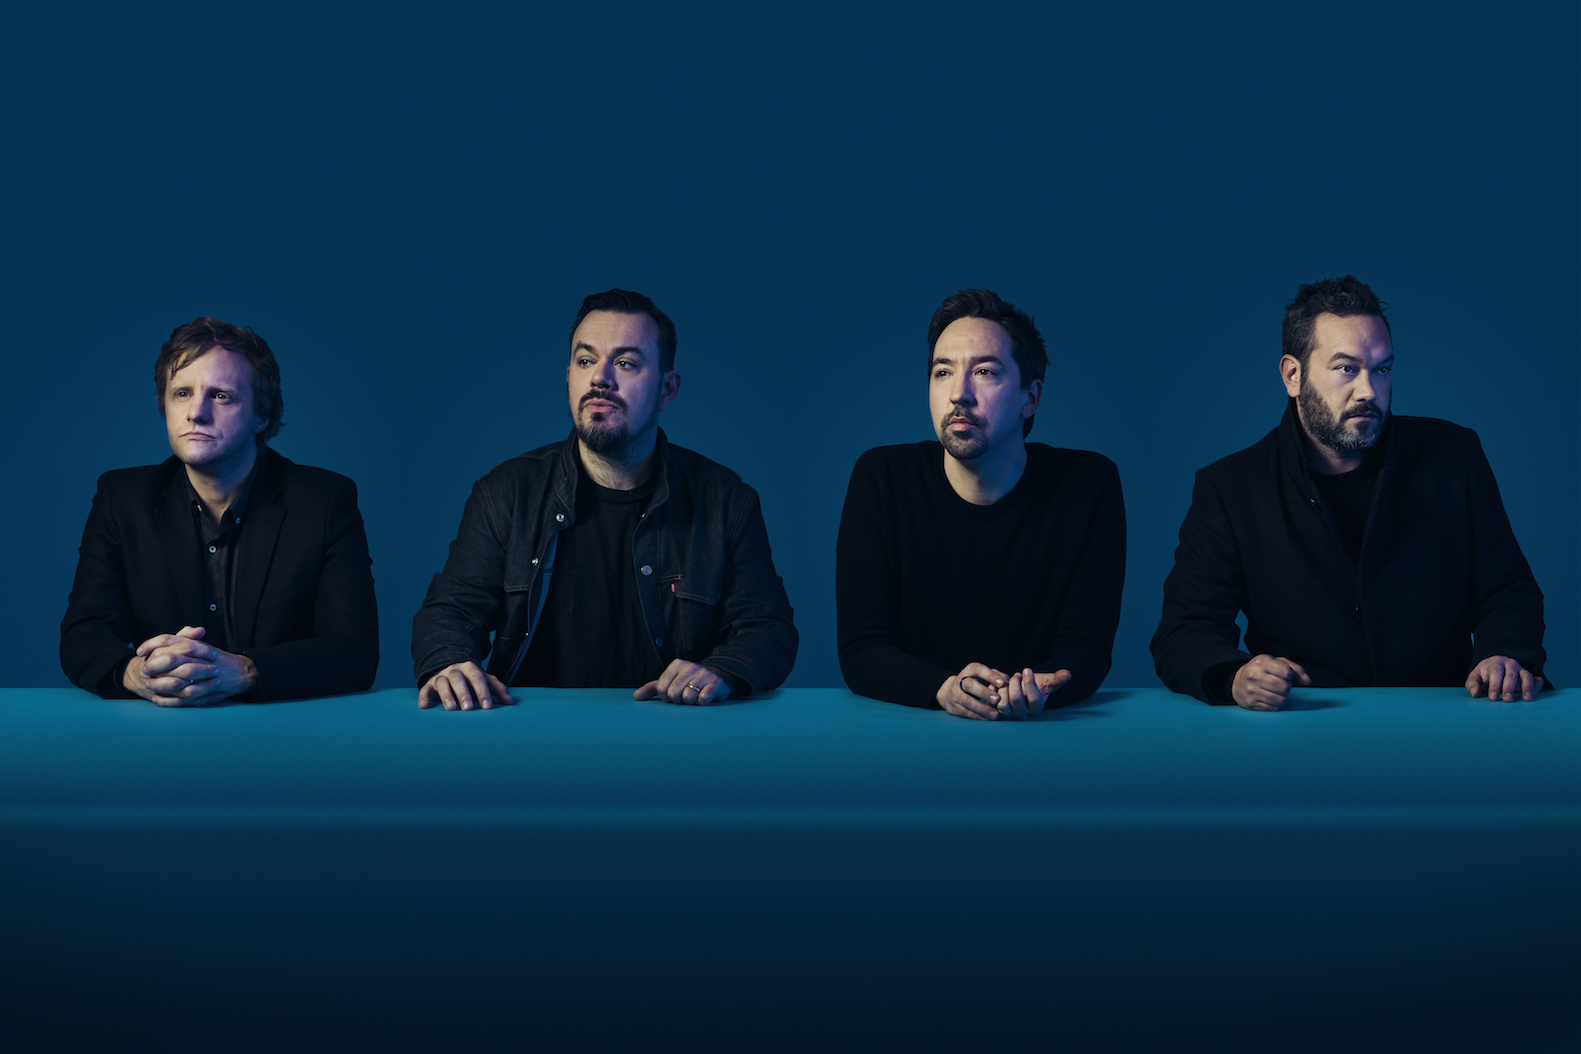 Shihad return to Aus stages this June and July